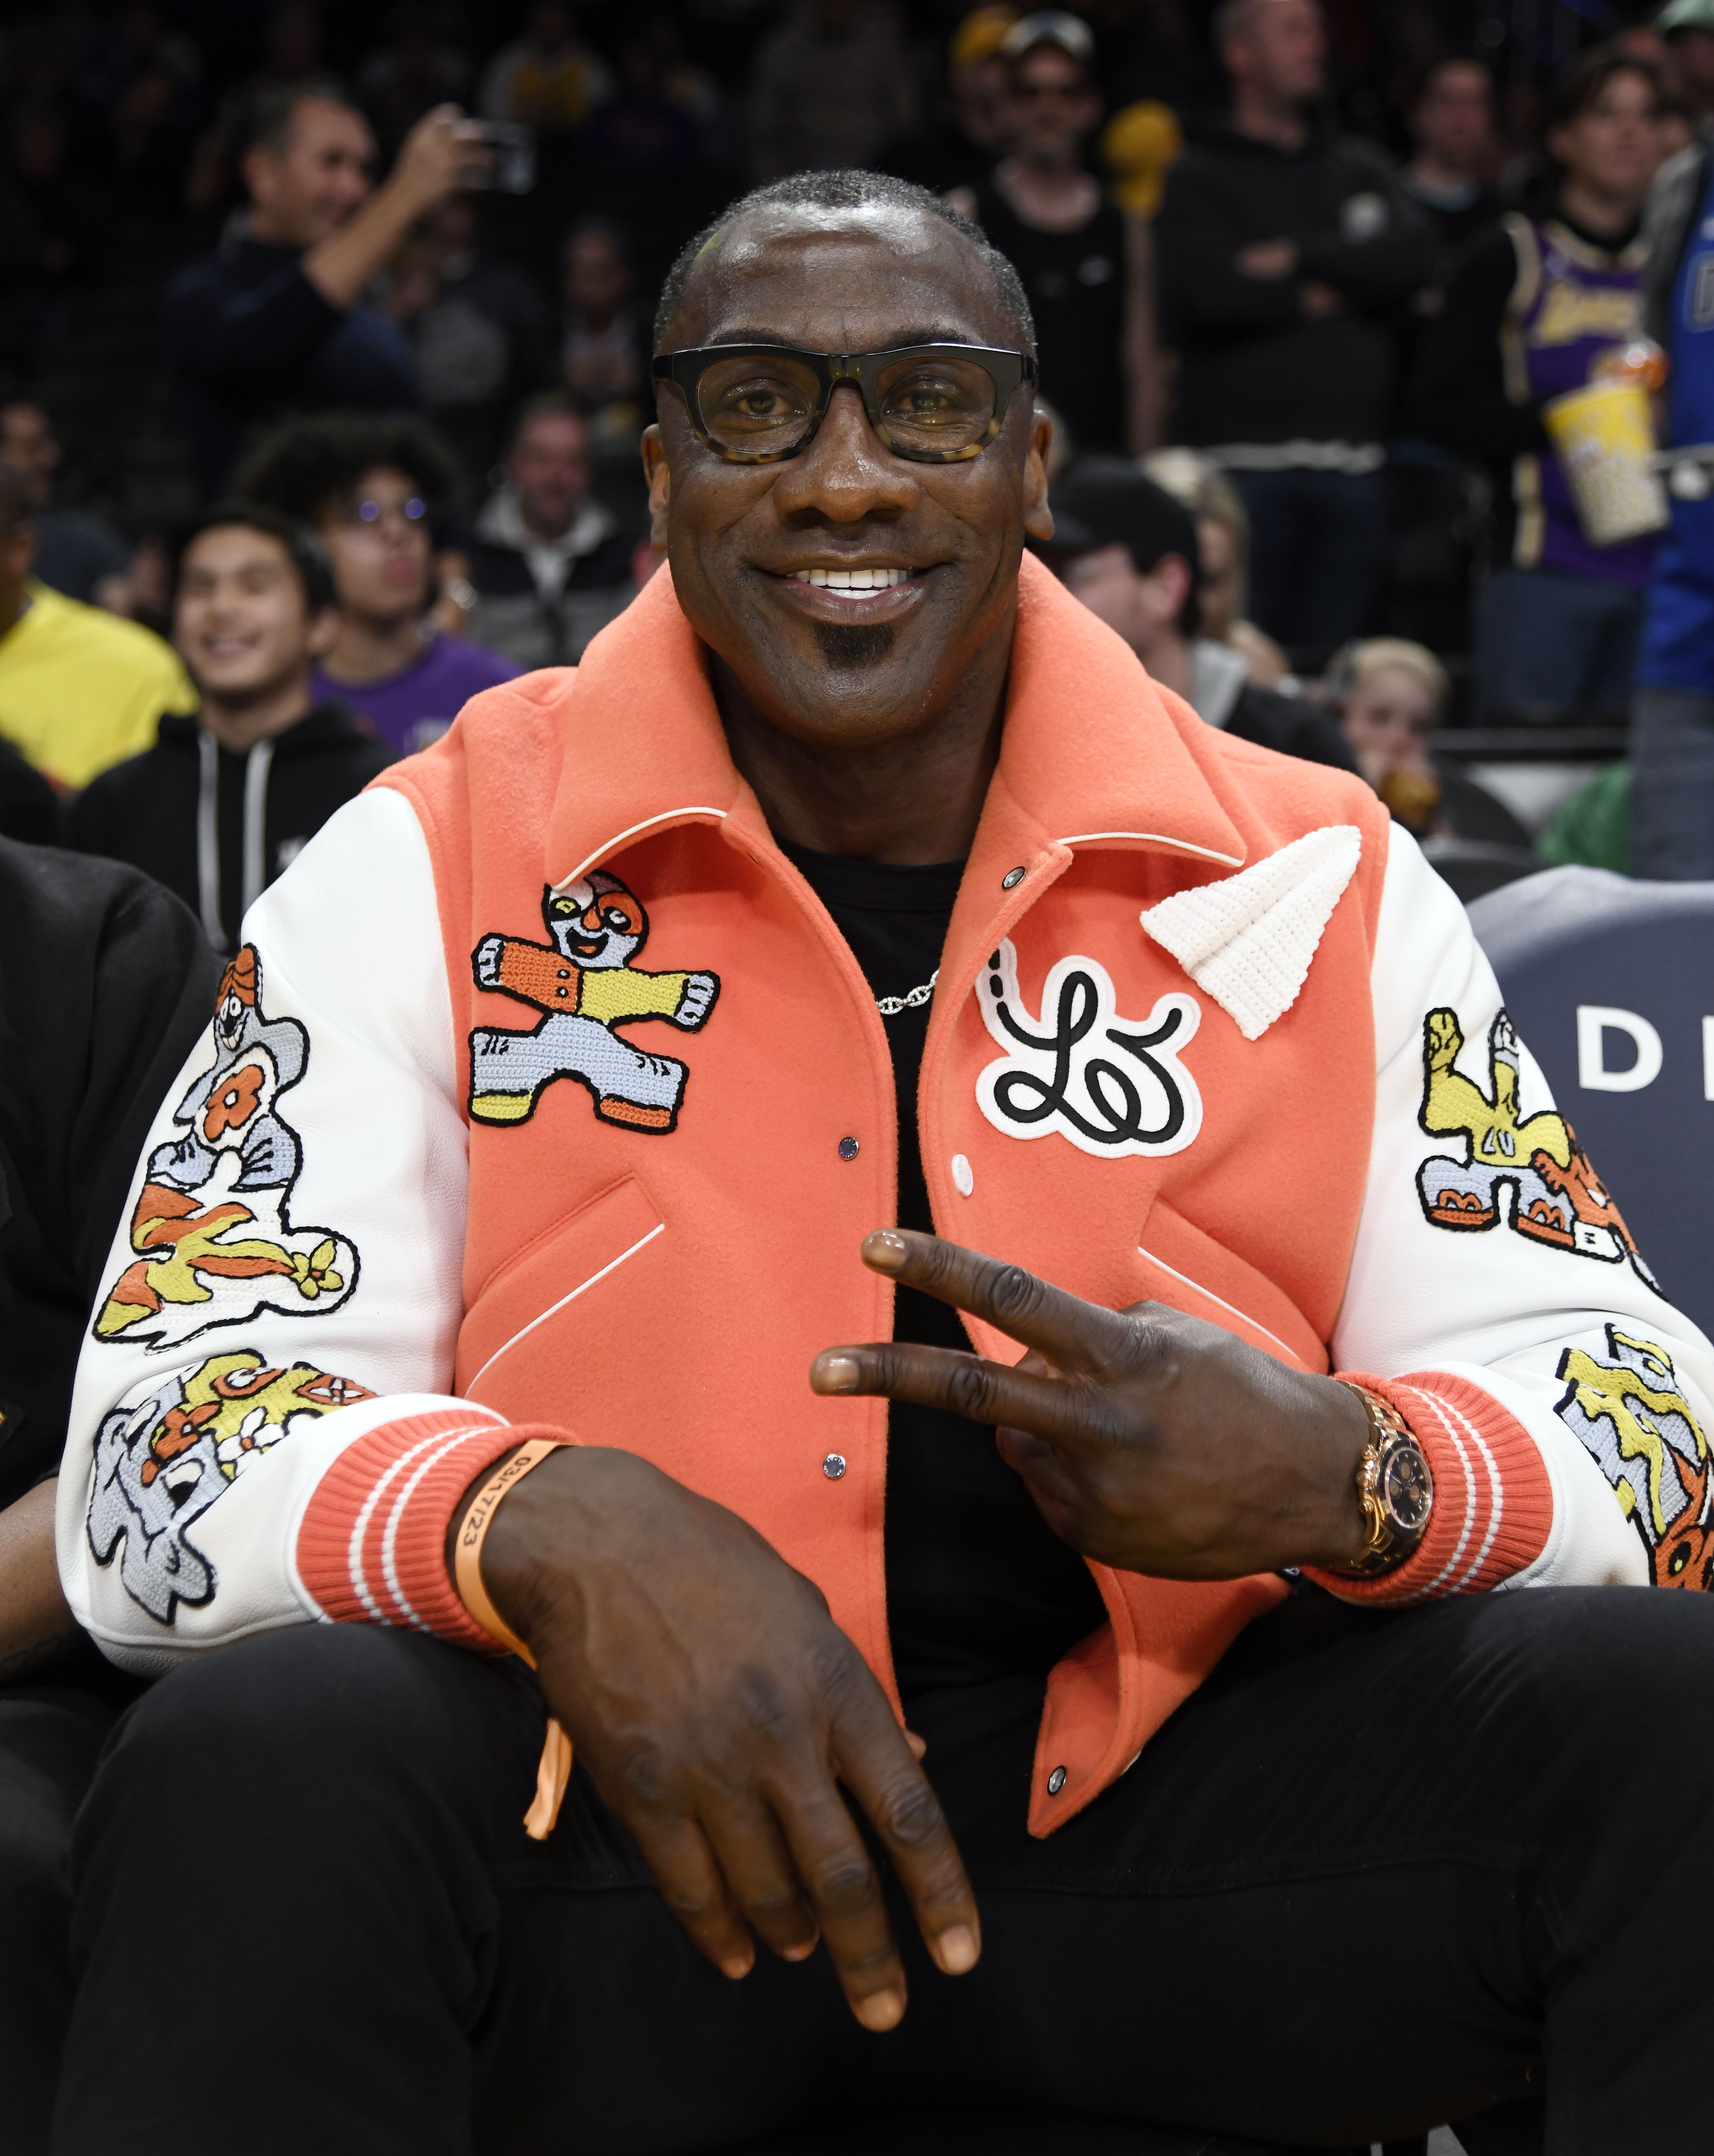 Shannon Sharpe at a basketball game between Dallas Mavericks and Los Angeles Lakers on March 17, 2023, in Los Angeles, California. | Source: Getty Images